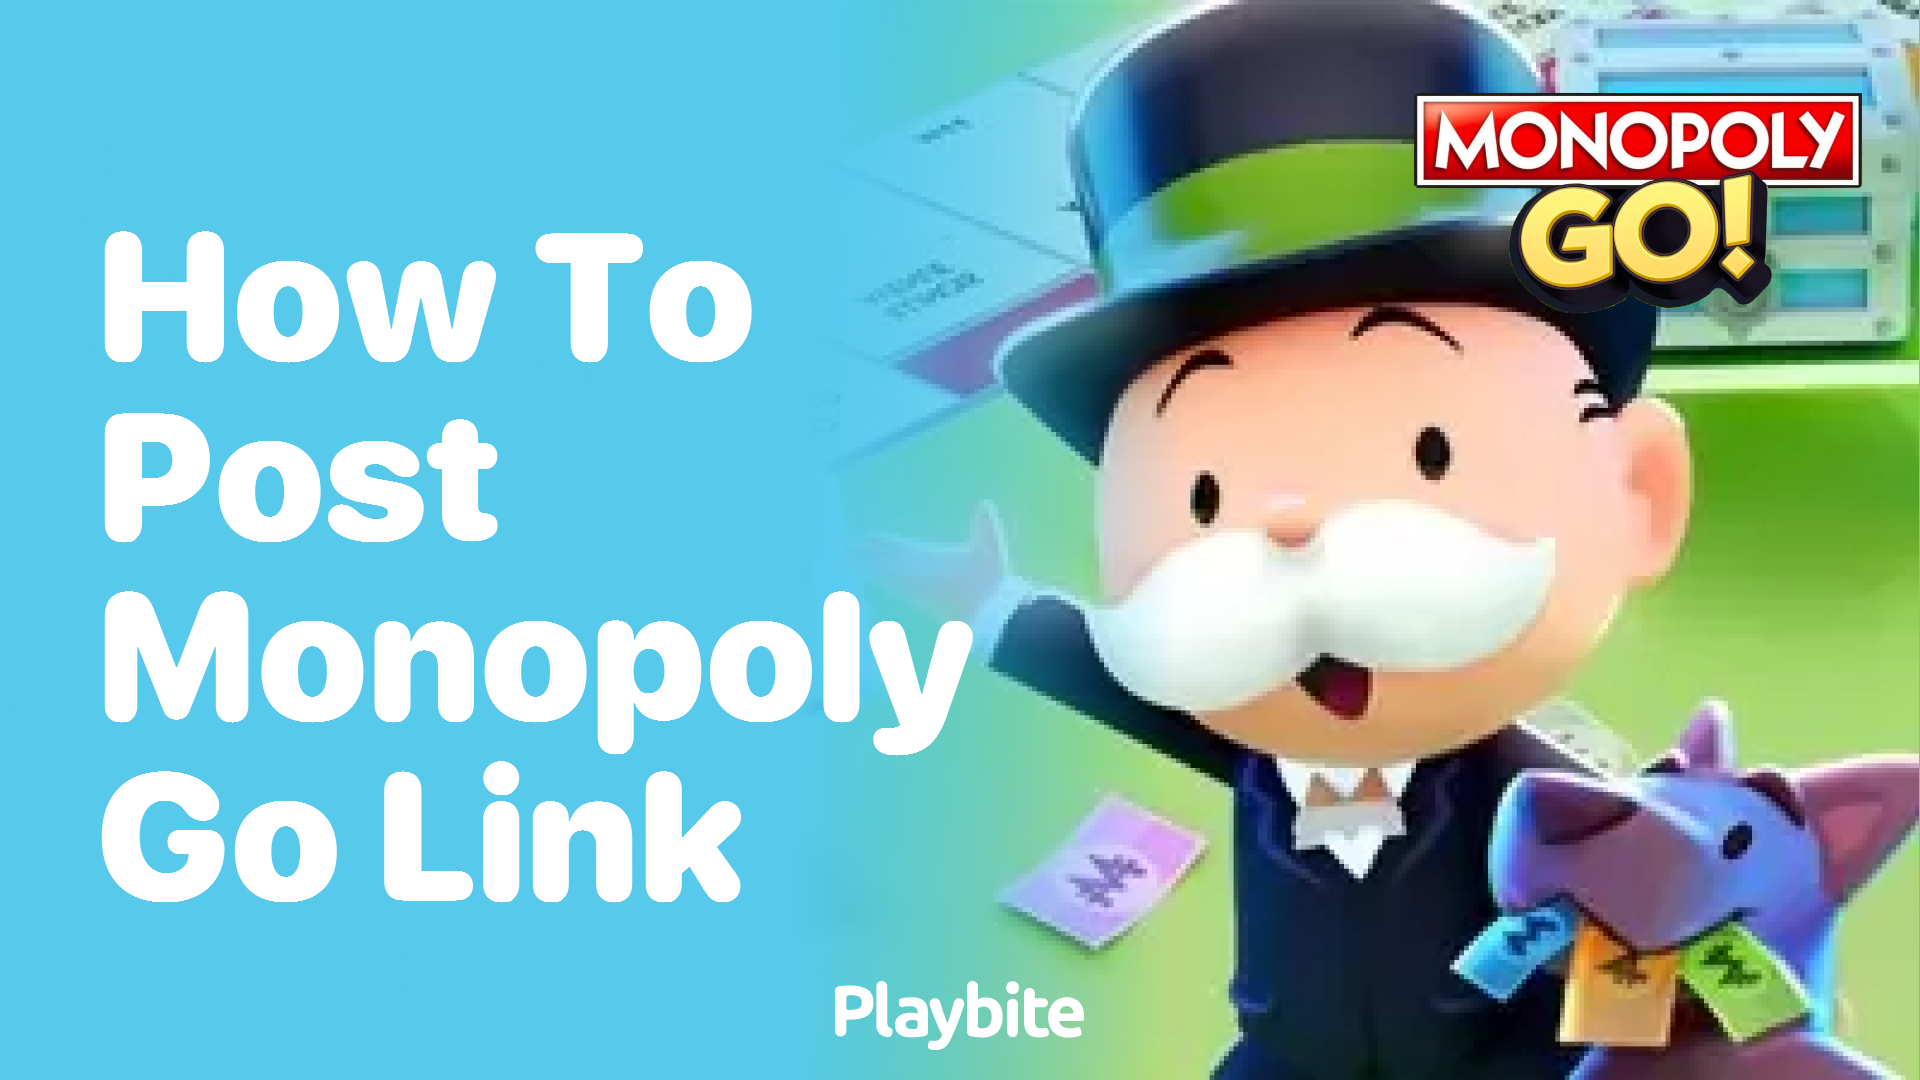 How to Post a Monopoly Go Link